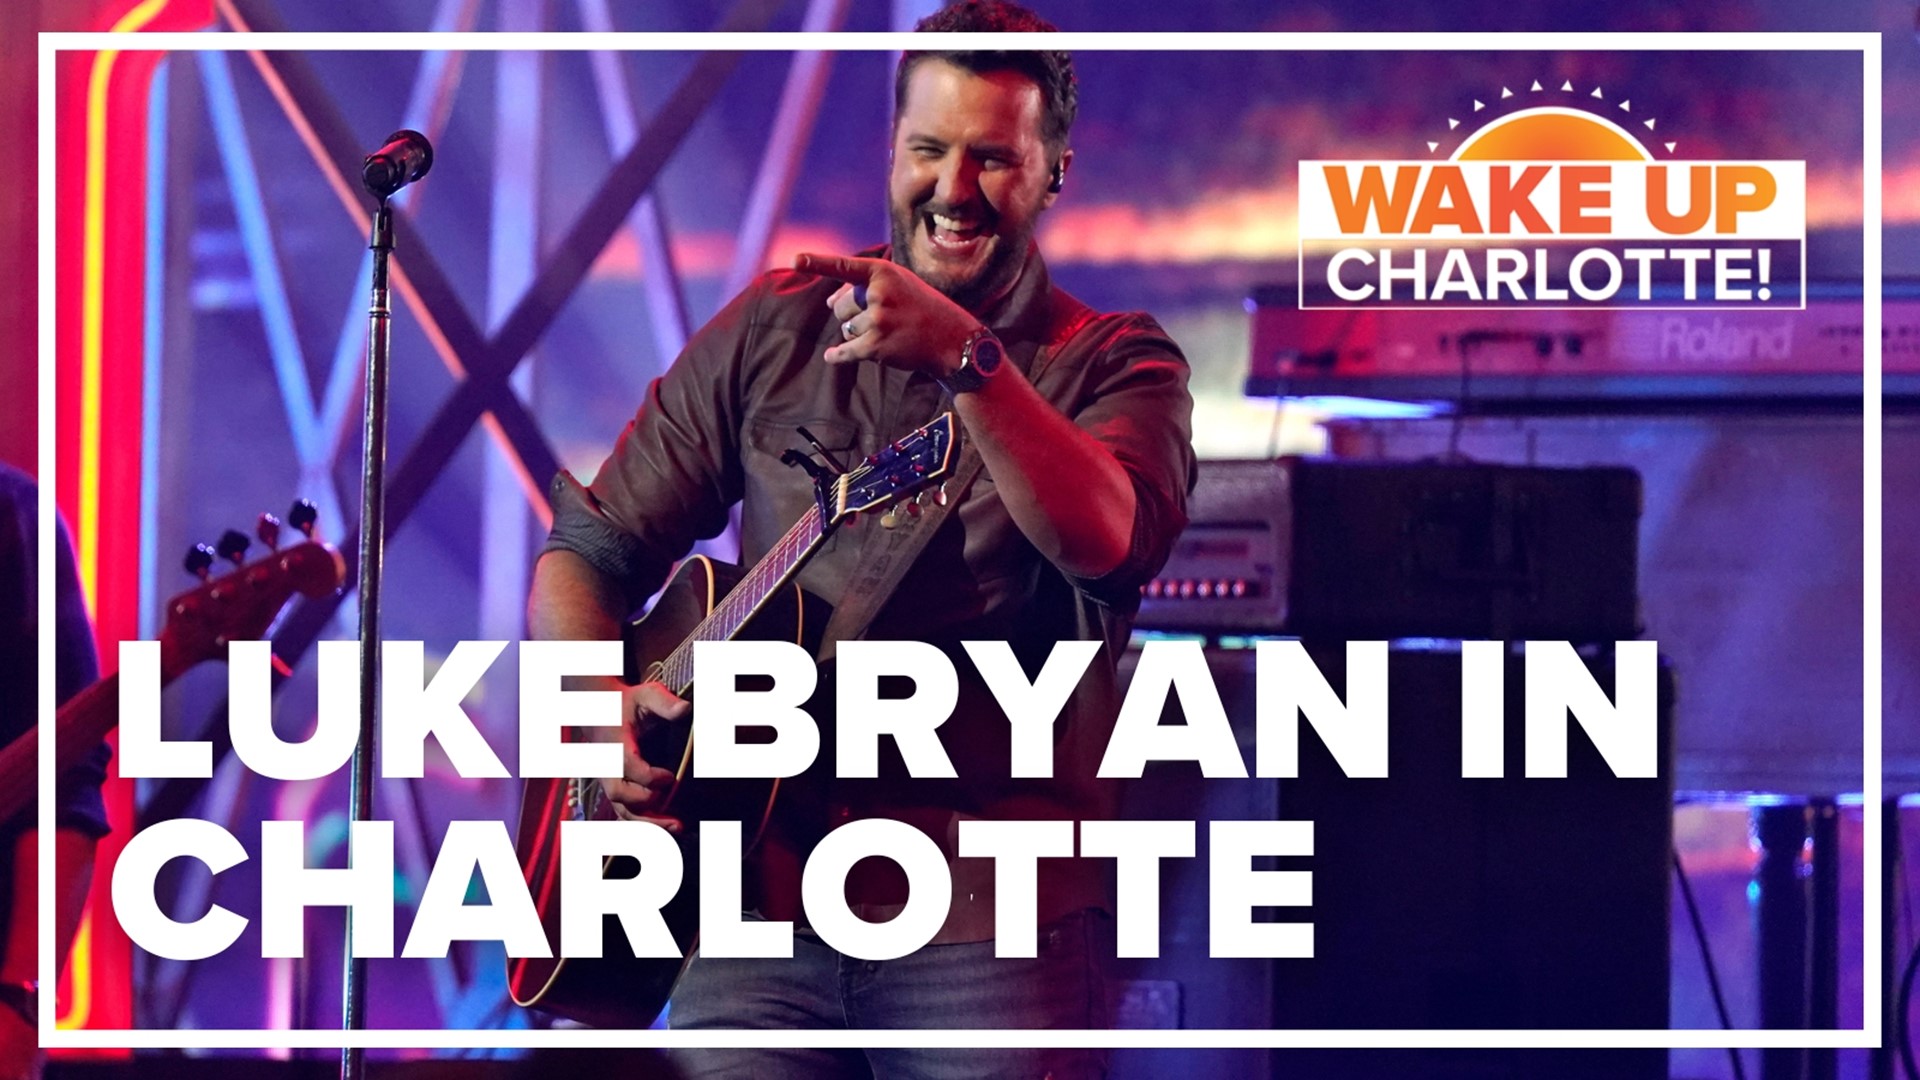 Bryan's "Country On Tour" will make a stop at PNC Music Pavilion in Charlotte, NC, on Oct. 7.